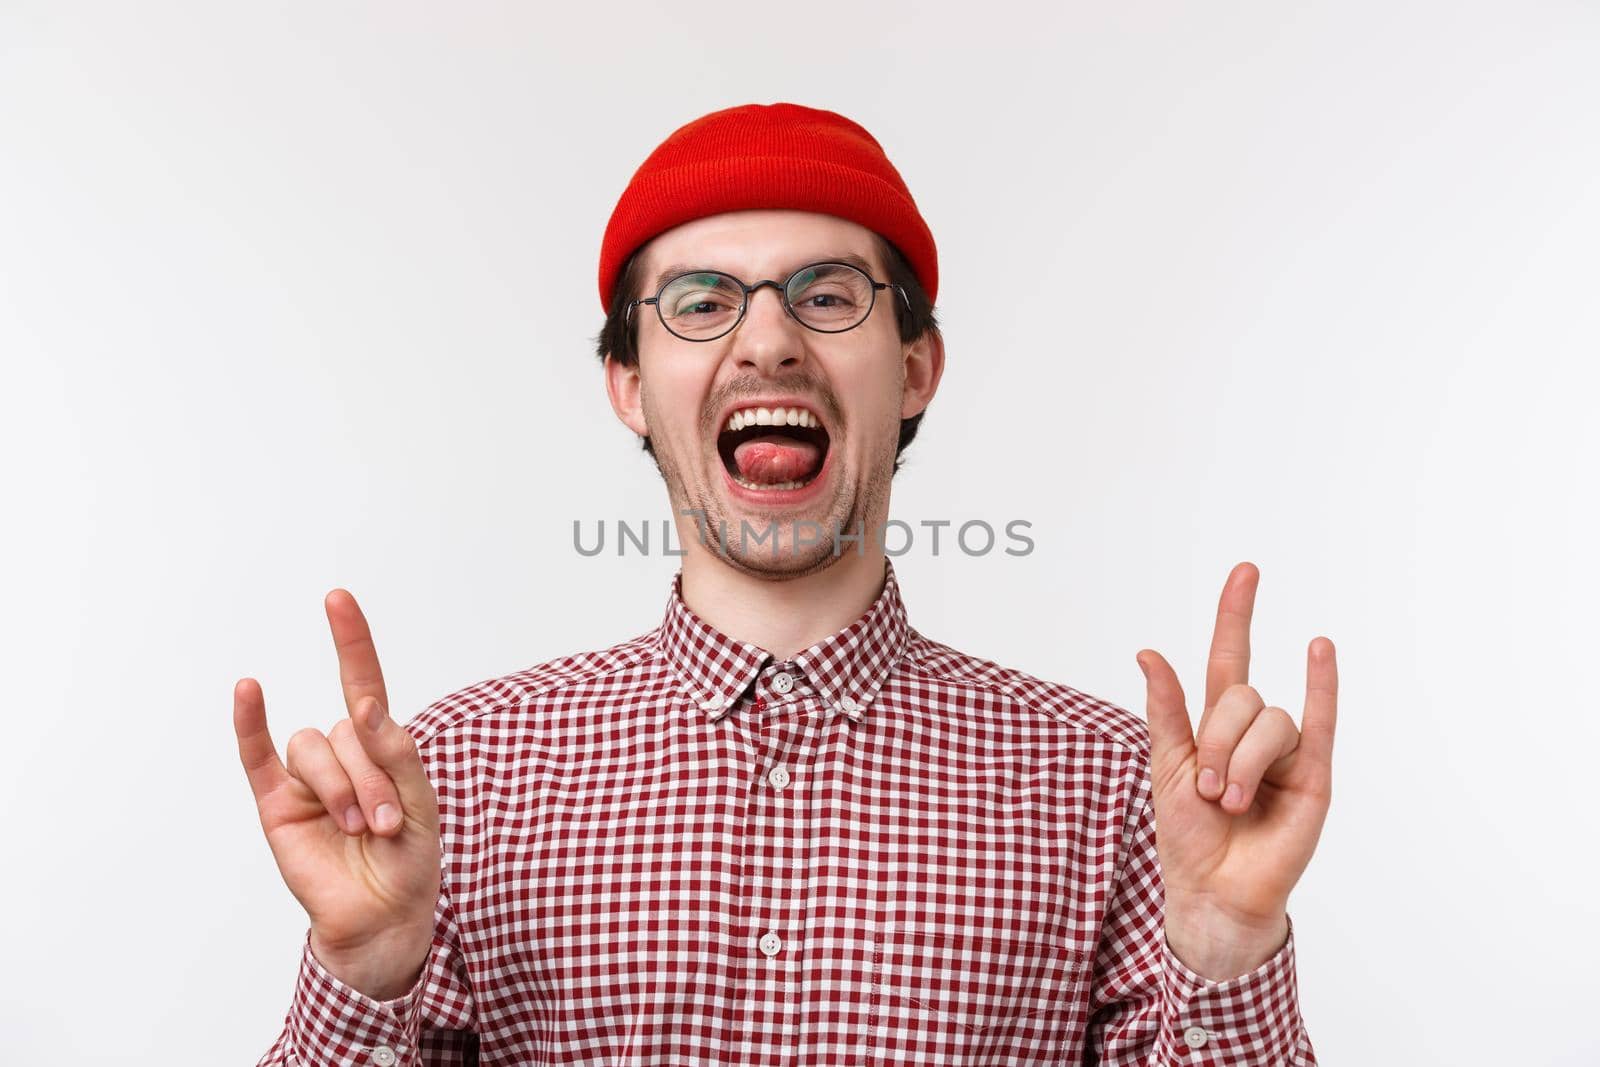 Close-up portrait funny cute bearded young adult guy in red beanie, glasses scream upbeat and excited, showing rock-n-roll, heavy metal gesture enjoying awesome party, standing white background.